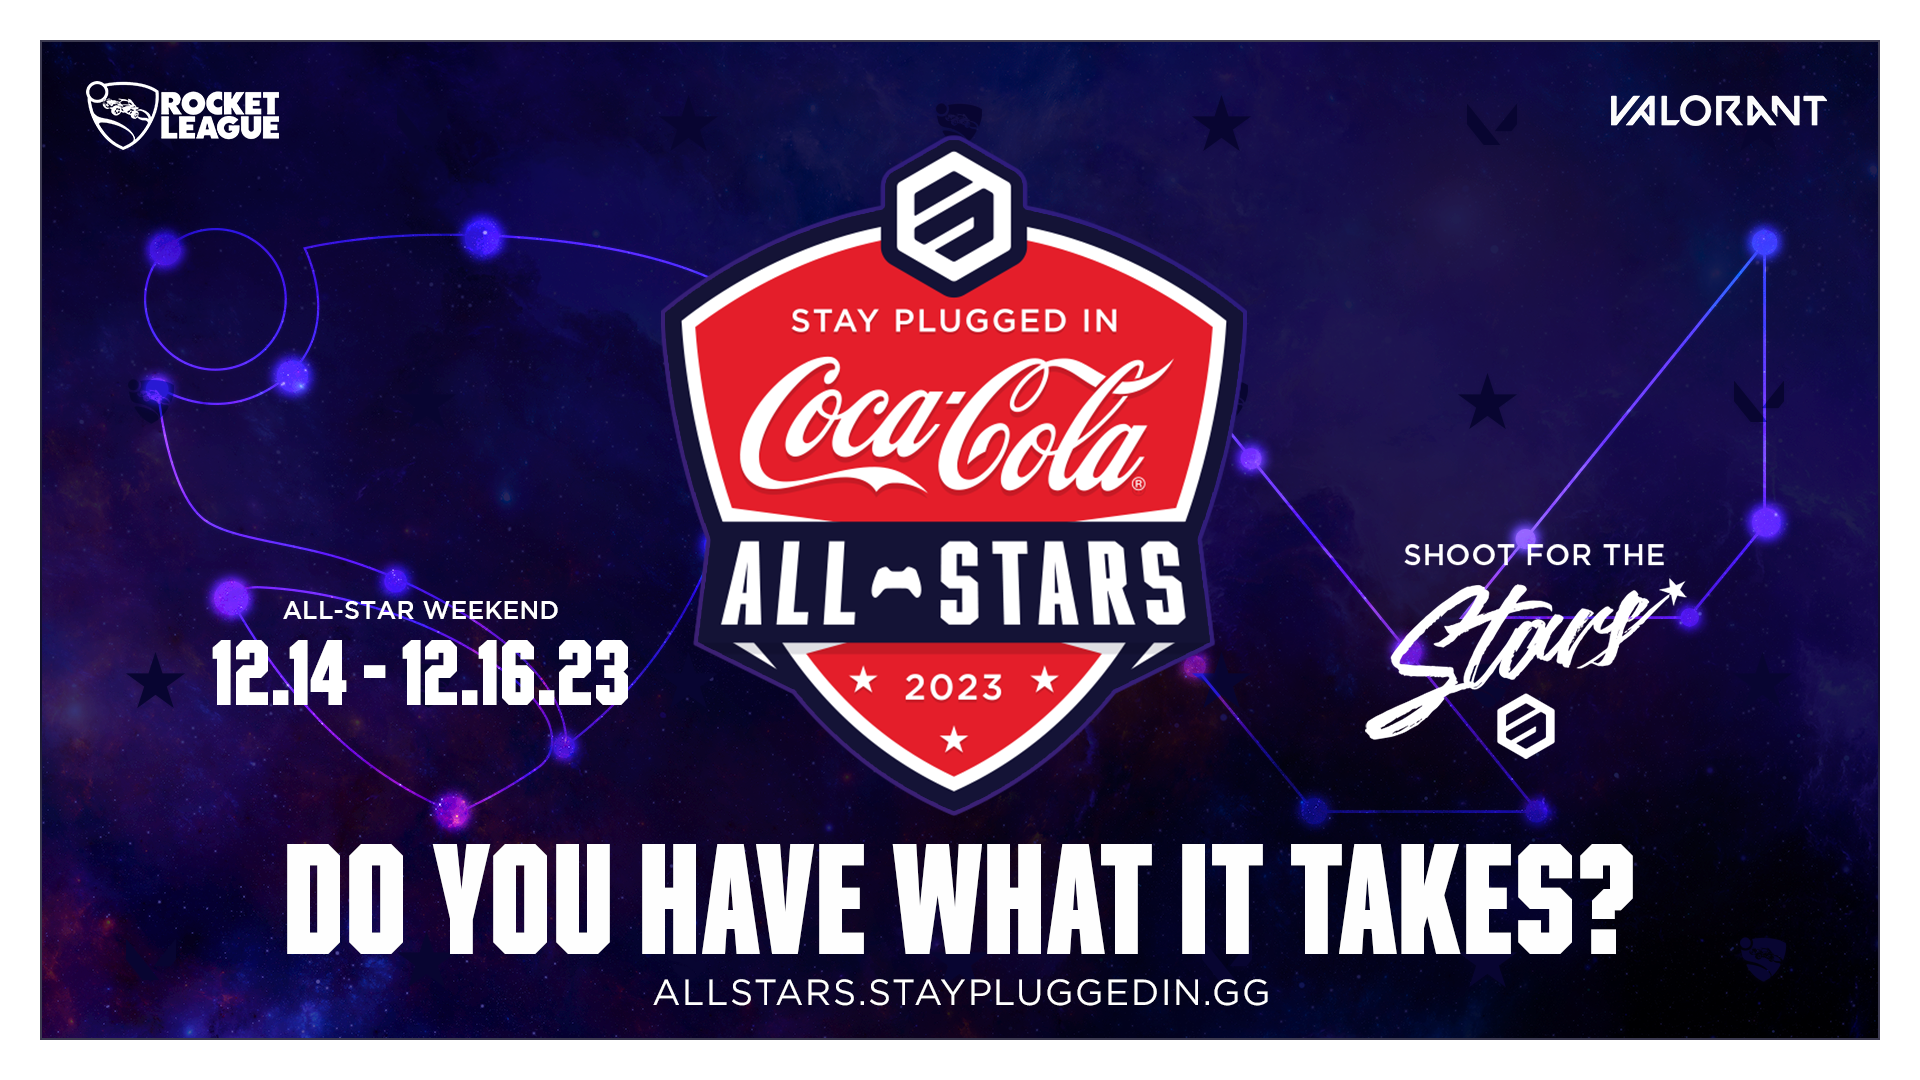 Announcing the 2023 Stay Plugged In Coca-Cola All-Star Tournament!